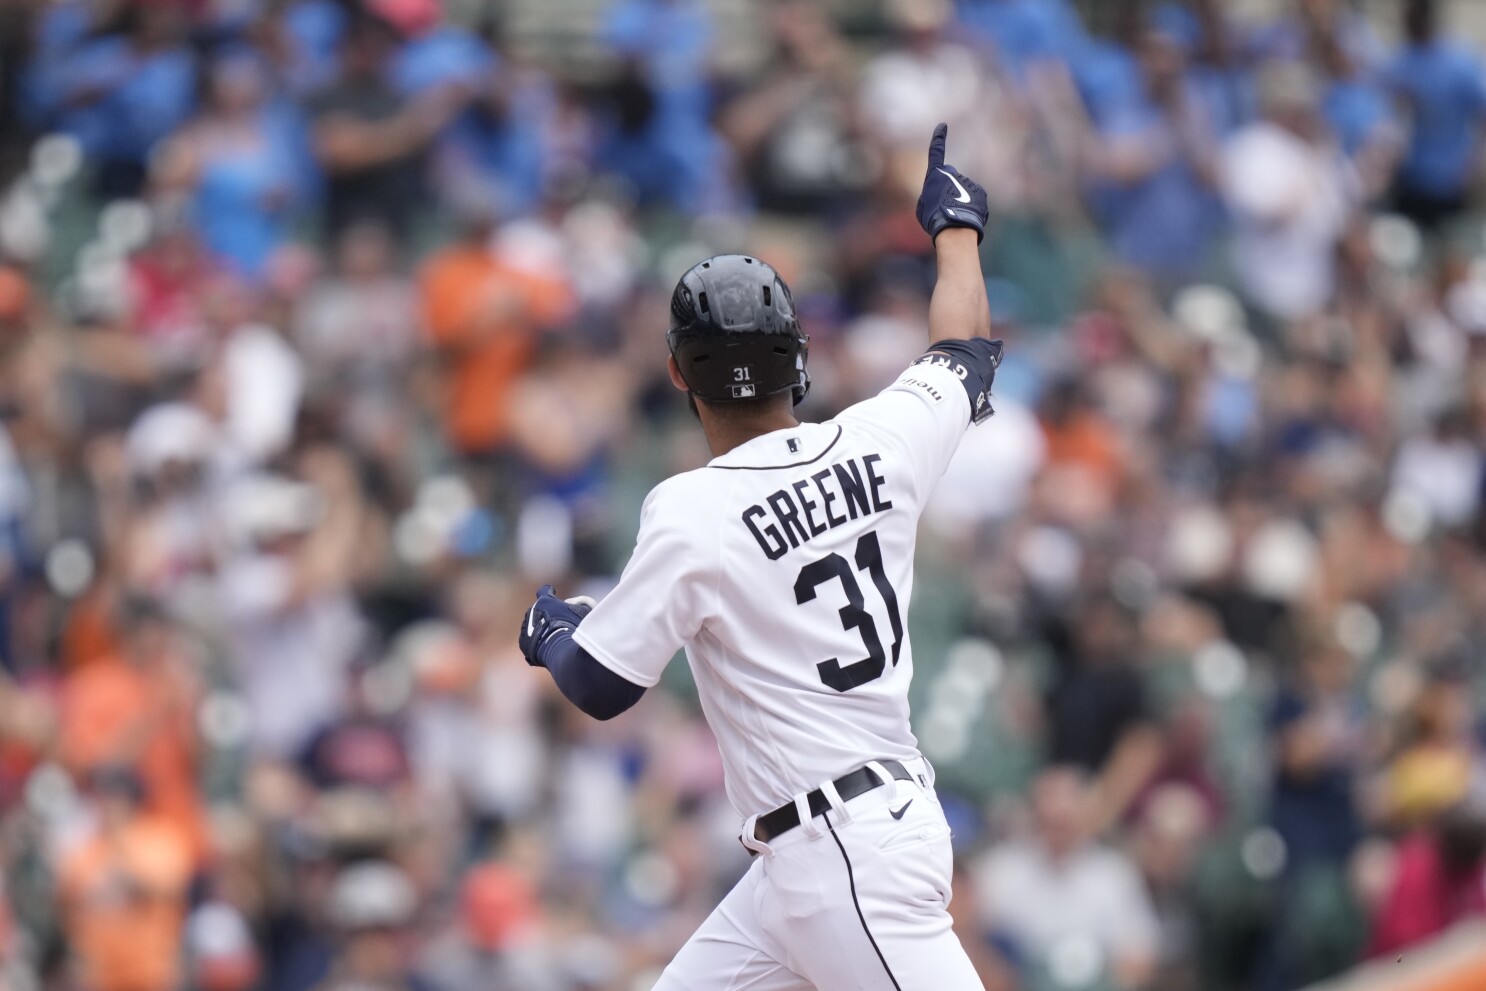 Greene, Reyes lead Tigers to 3rd straight win over Guardians